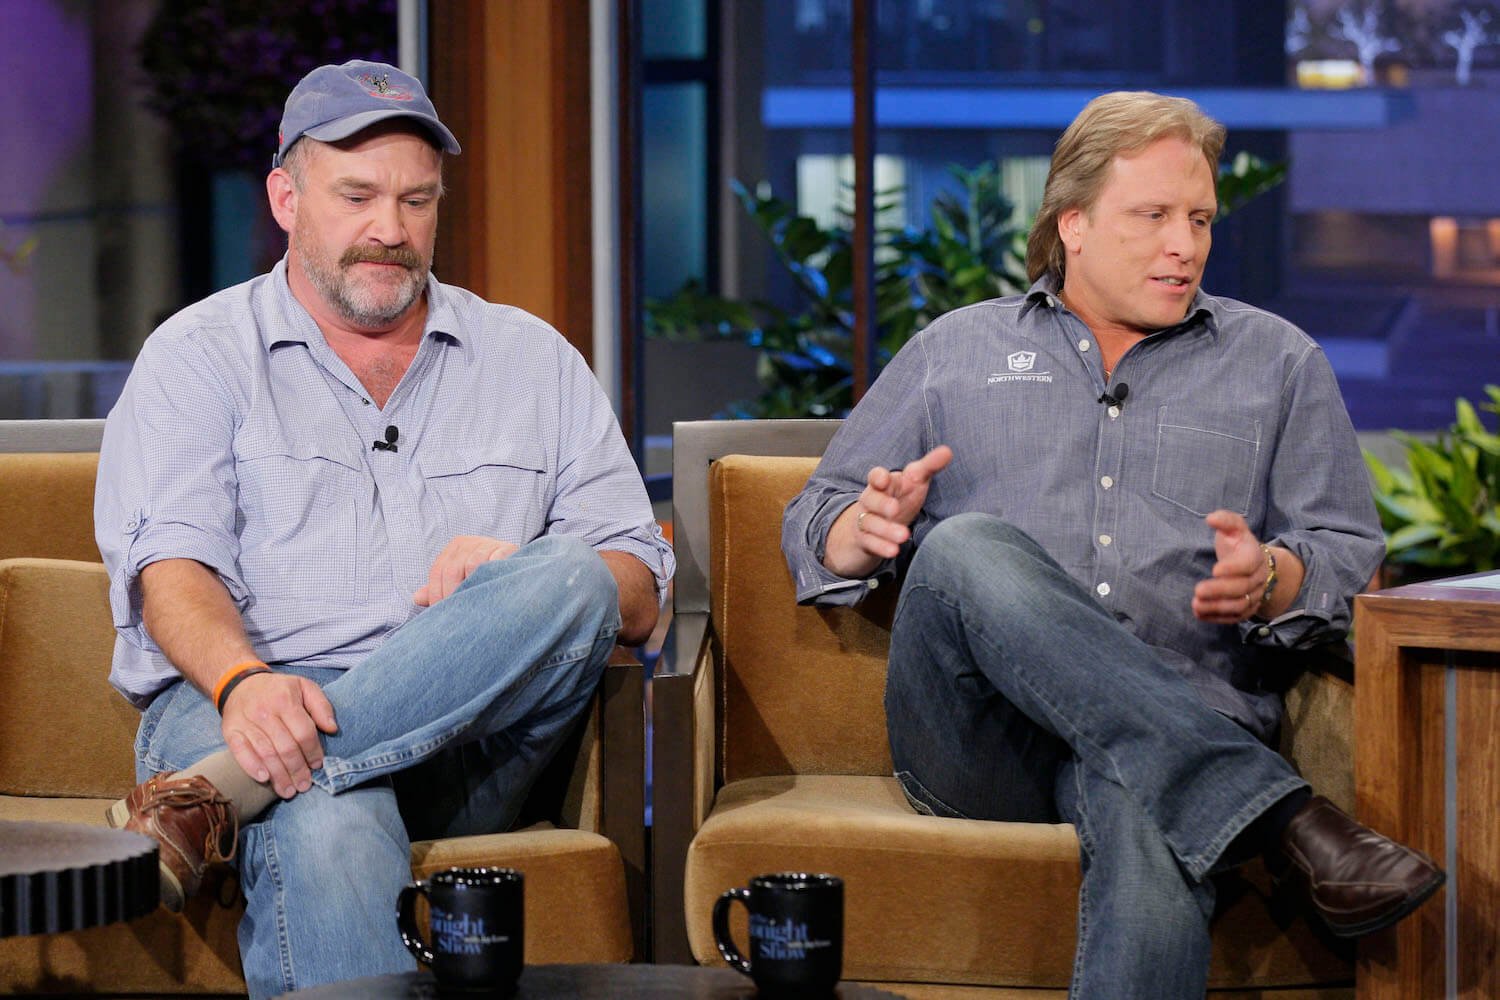 Keith Colburn and Sig Hansen from 'Deadliest Catch' sitting next to each other during an interview